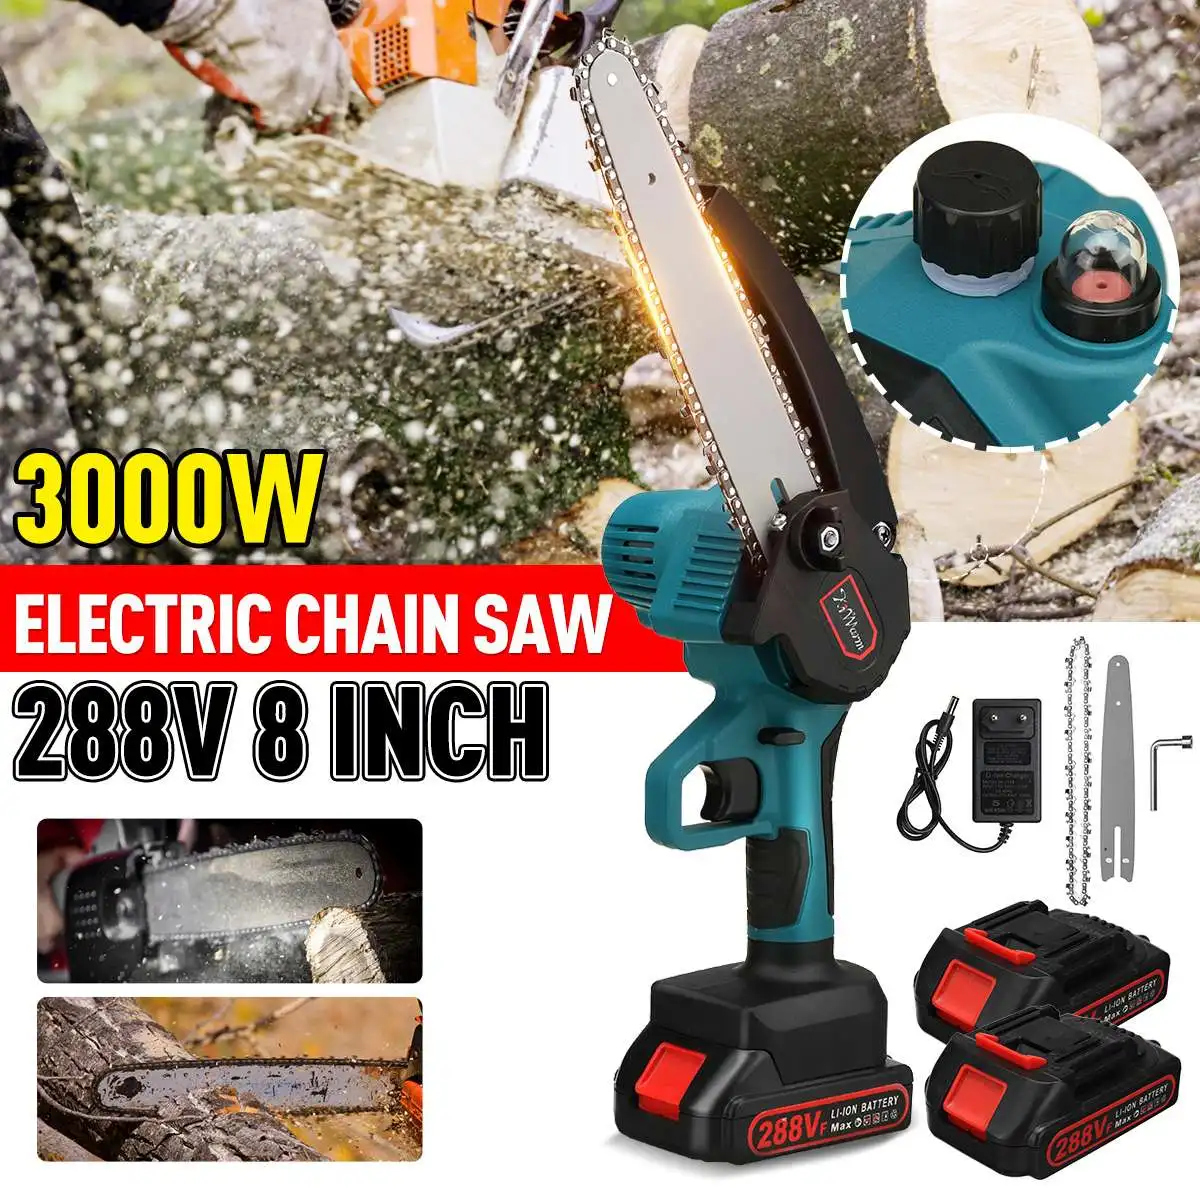 3000W 8 Inch Electric Chainsaws Rechargeable Woodworking One-handed Garden Logging Trimming Pruning Saw For Makita 18V Battery